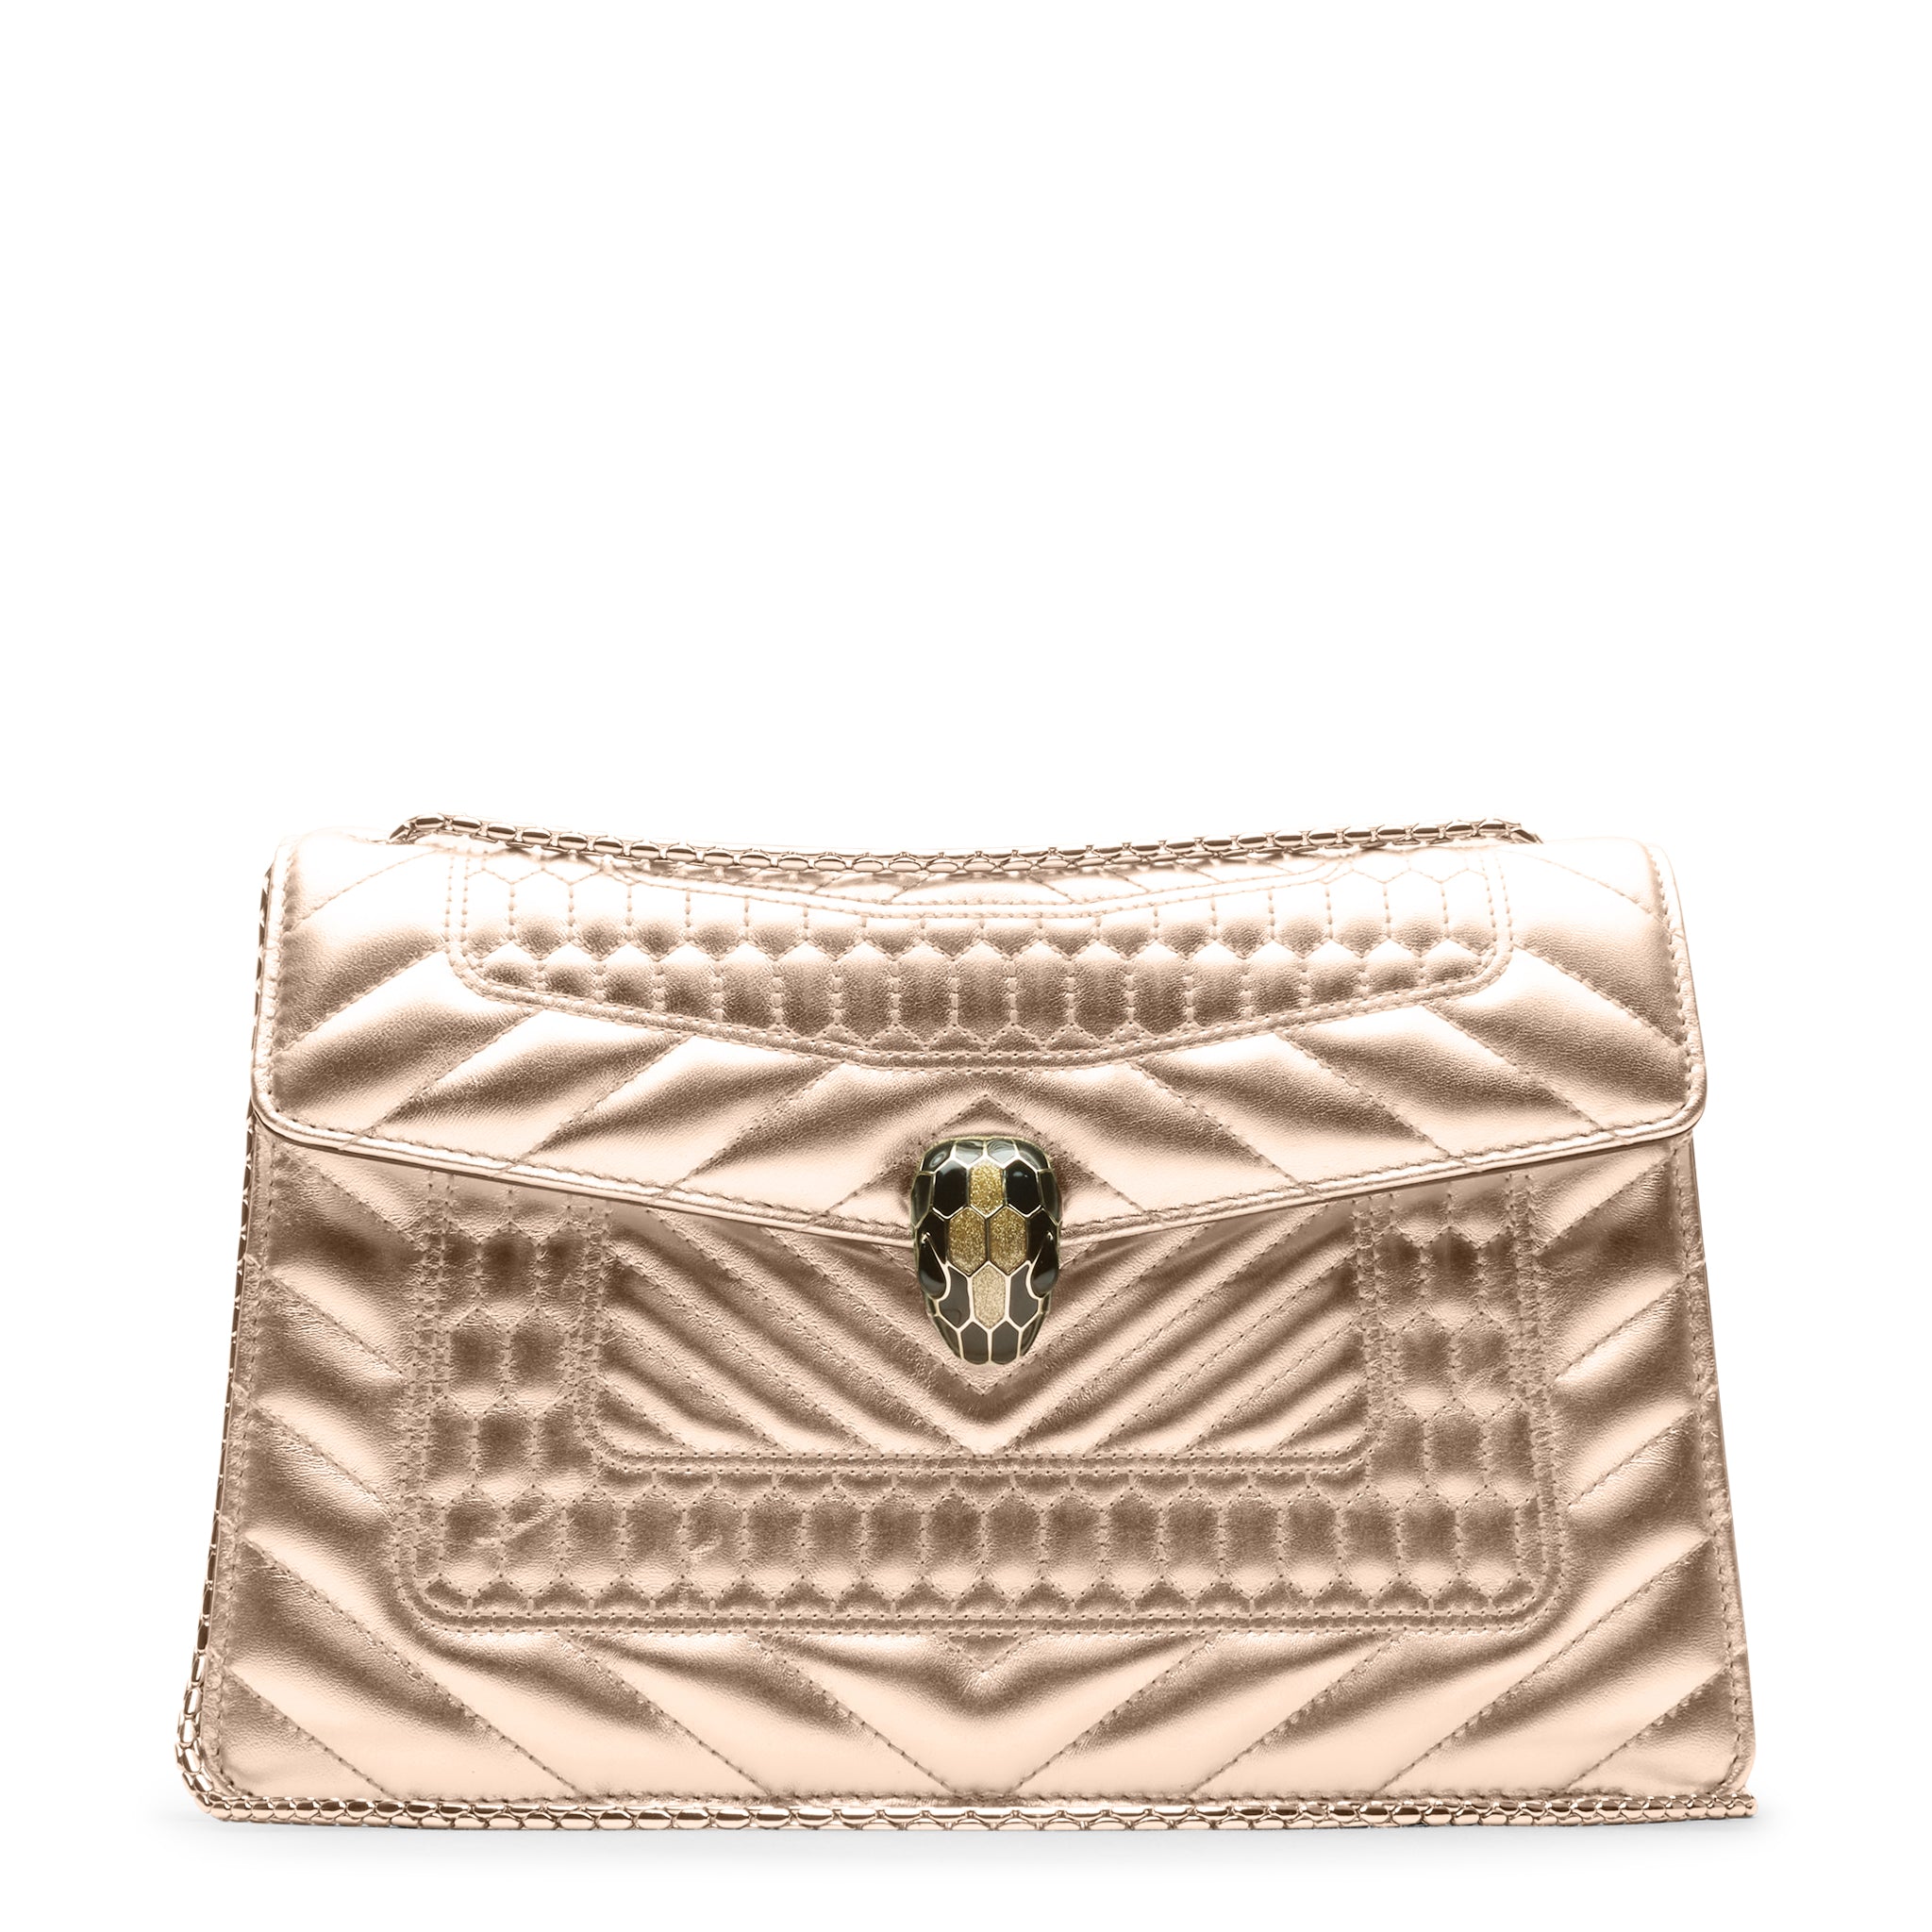 Front view of bvlgari serpenti nappa leather bag gold sea-002-0521s 